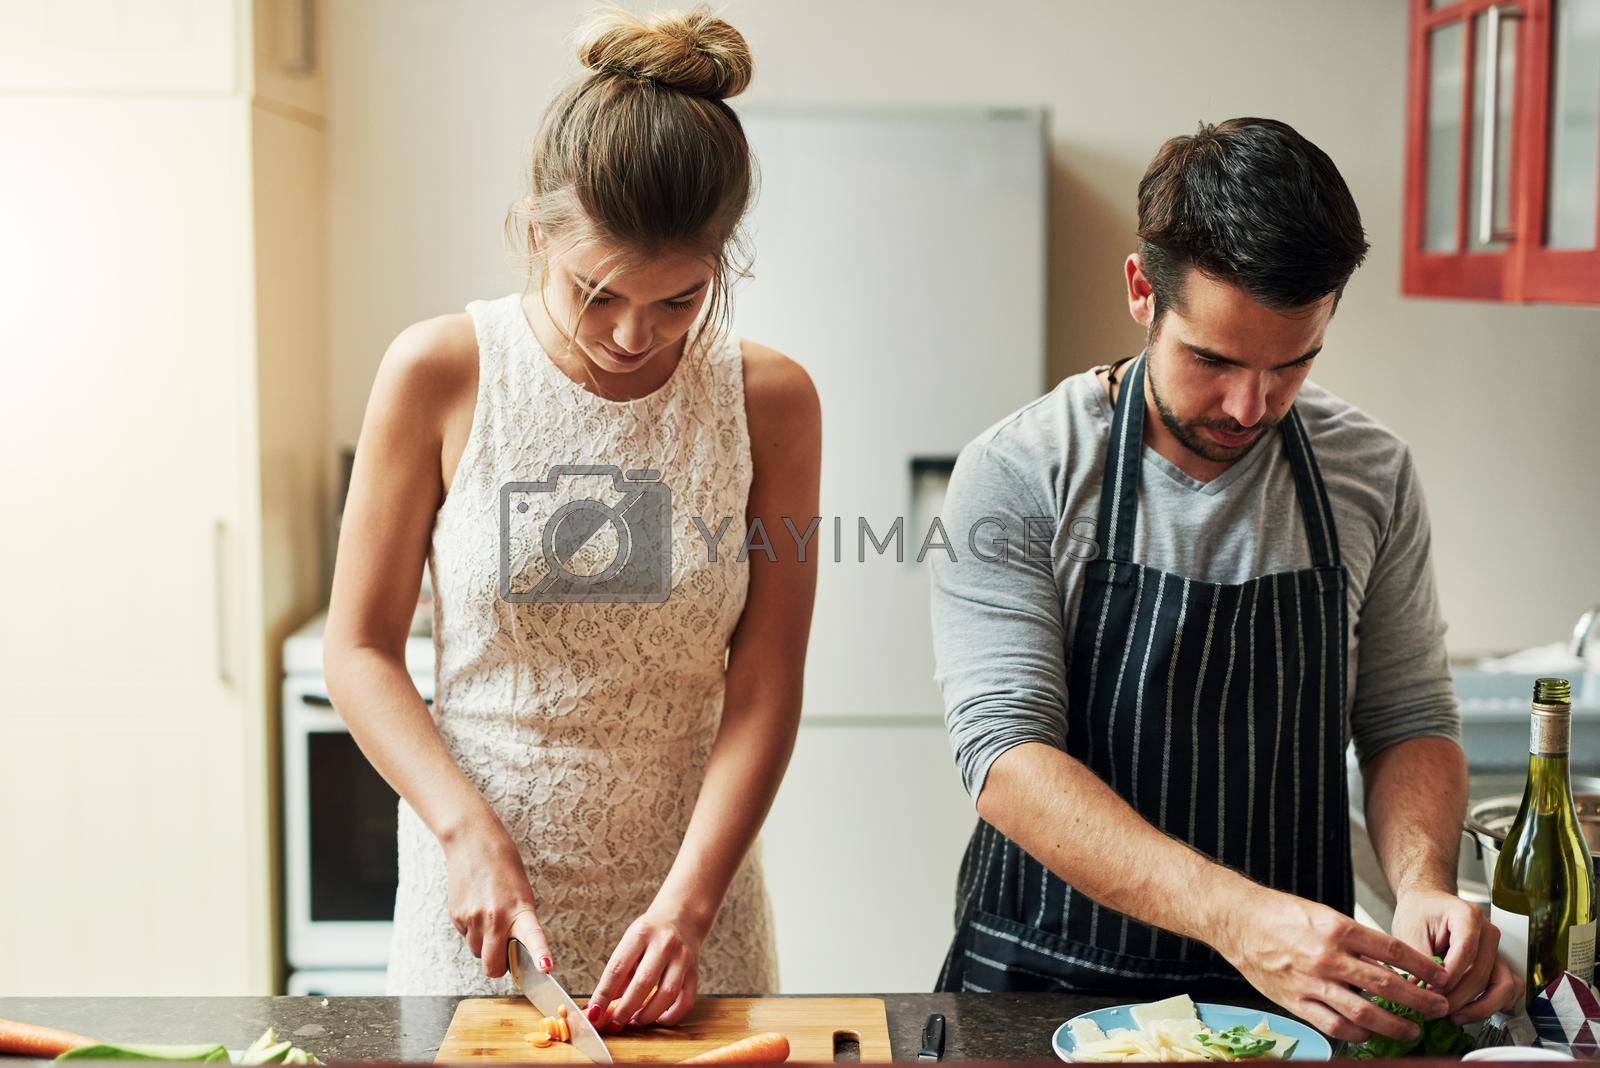 Cooking with love provides food for the soul. an affectionate young couple preparing food together at home